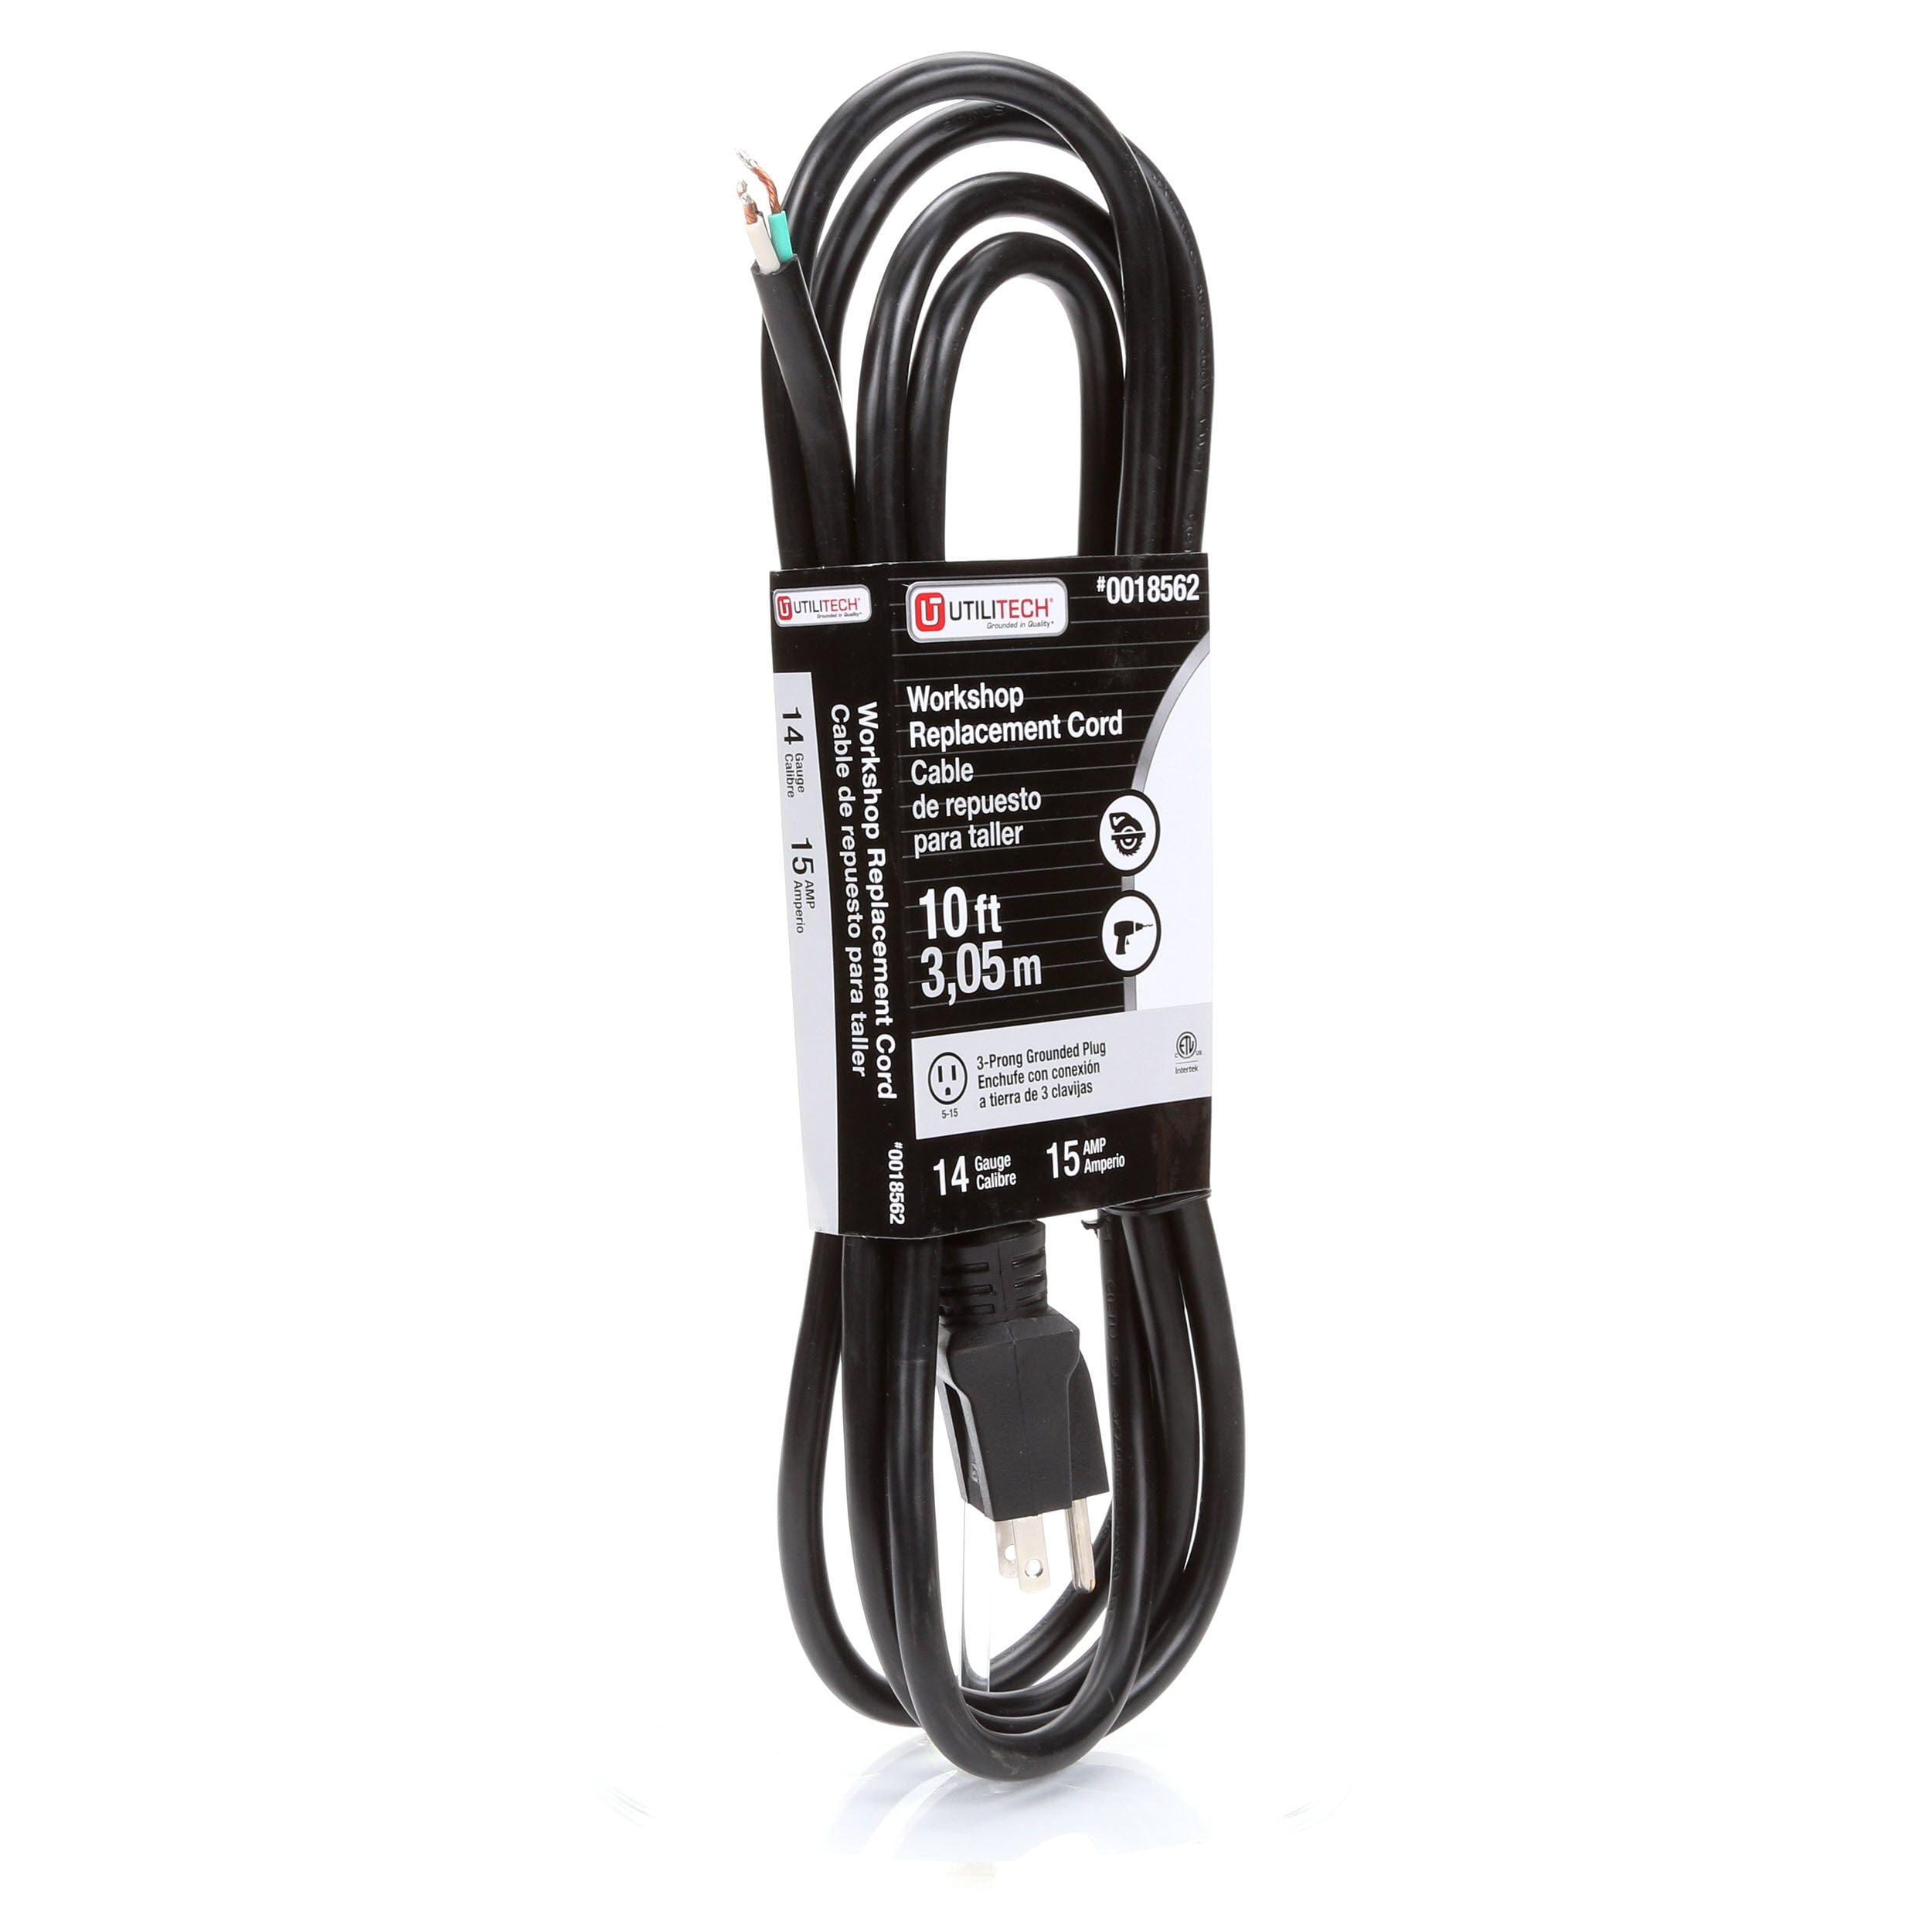 POWER FIRST 52NY24 Lock Ext Cord,25ft,12Ga,15A,SJTW,Yel/Blk 